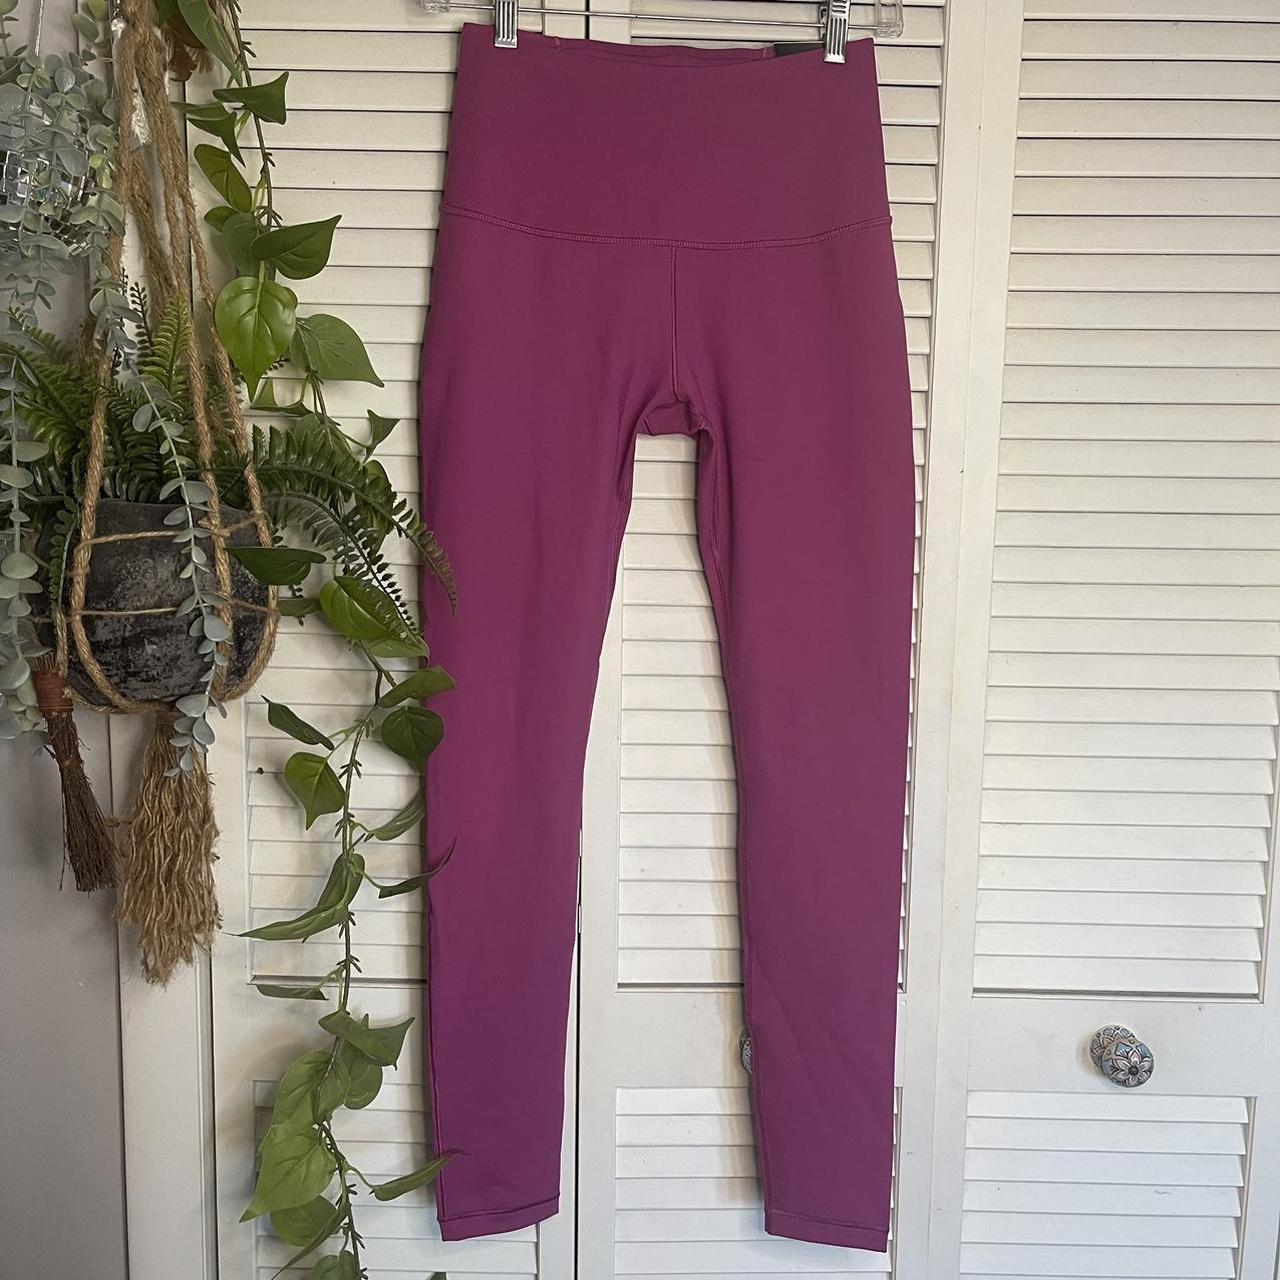 Calia by Carrie Underwood Multi Color Pink Leggings Size S - 56